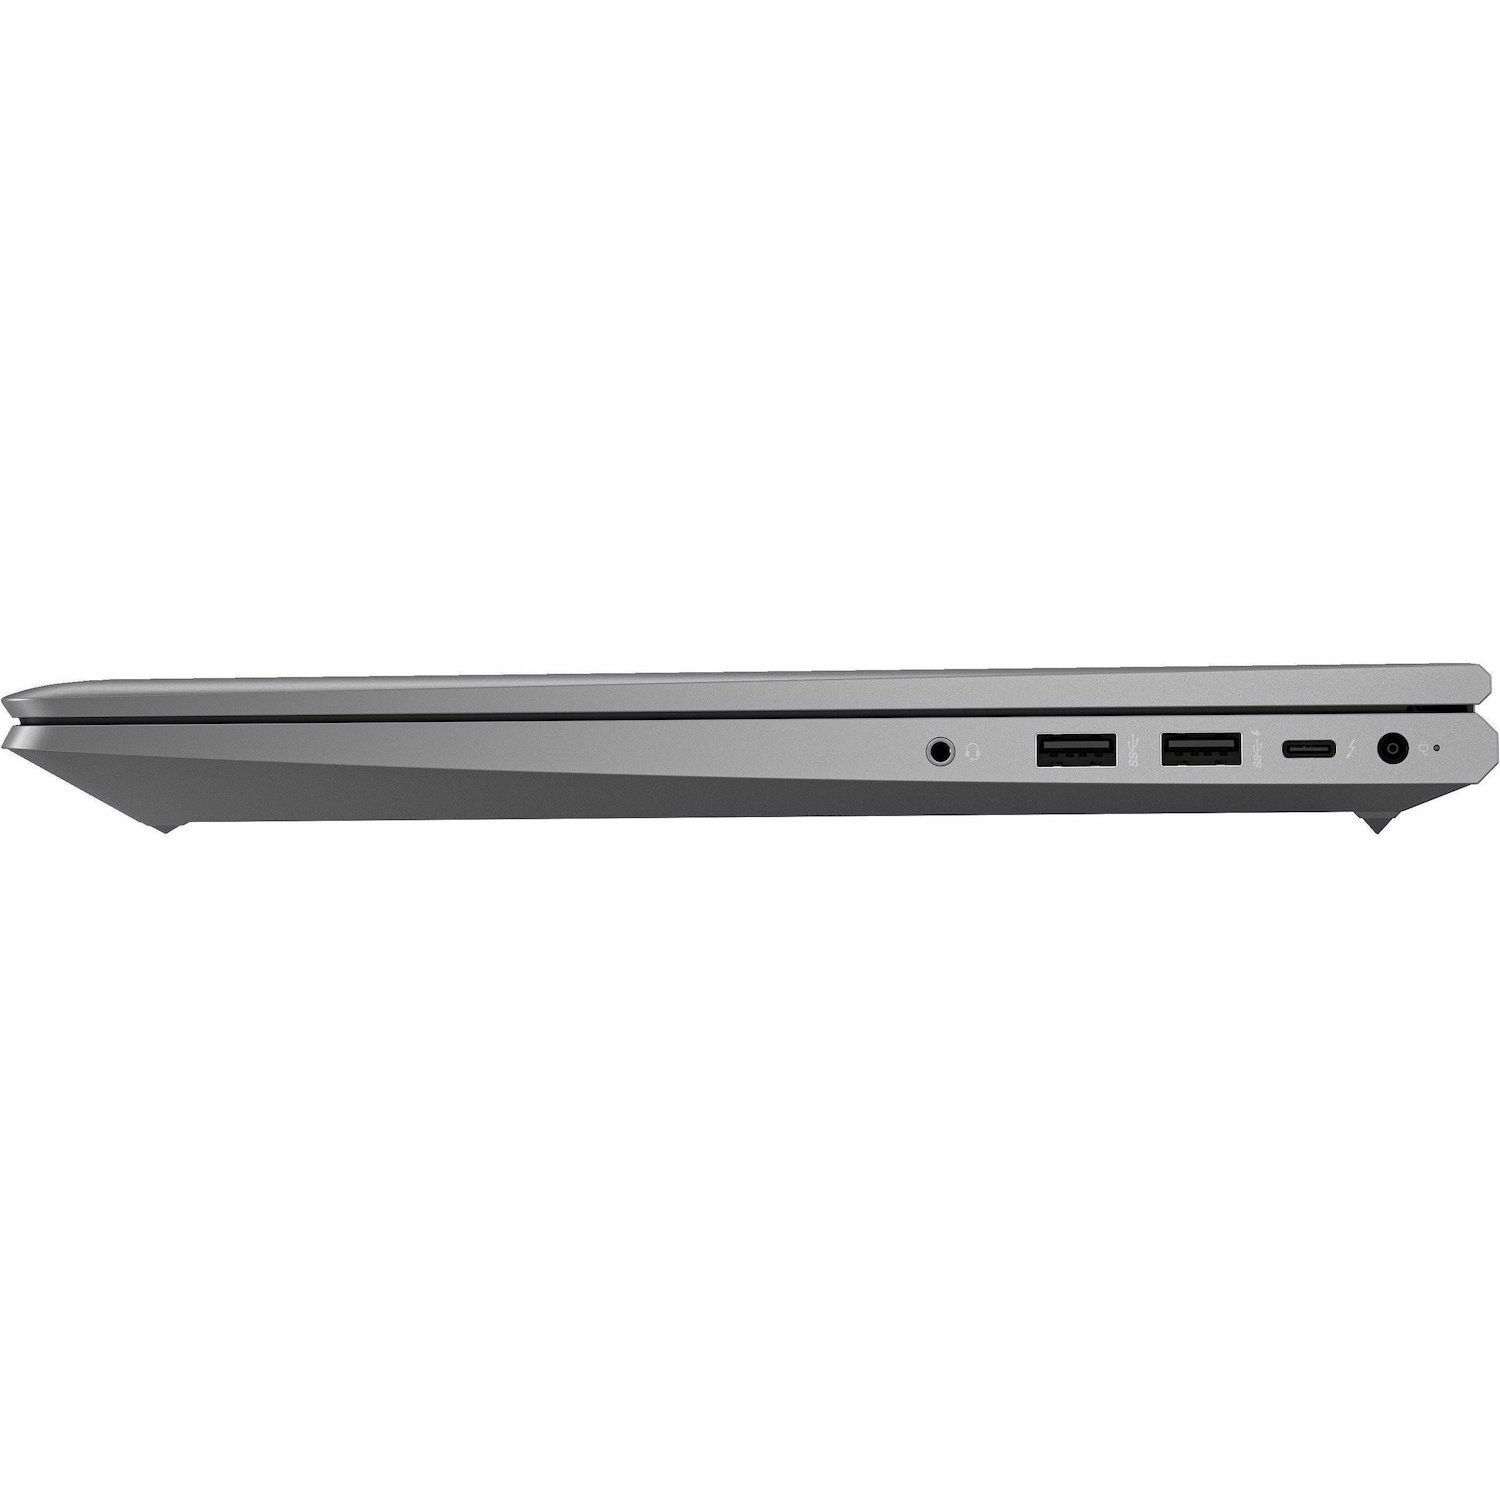 HP ZBook Power G10 15.6" Mobile Workstation - Full HD - Intel Core i7 13th Gen i7-13700H - 16 GB - 512 GB SSD